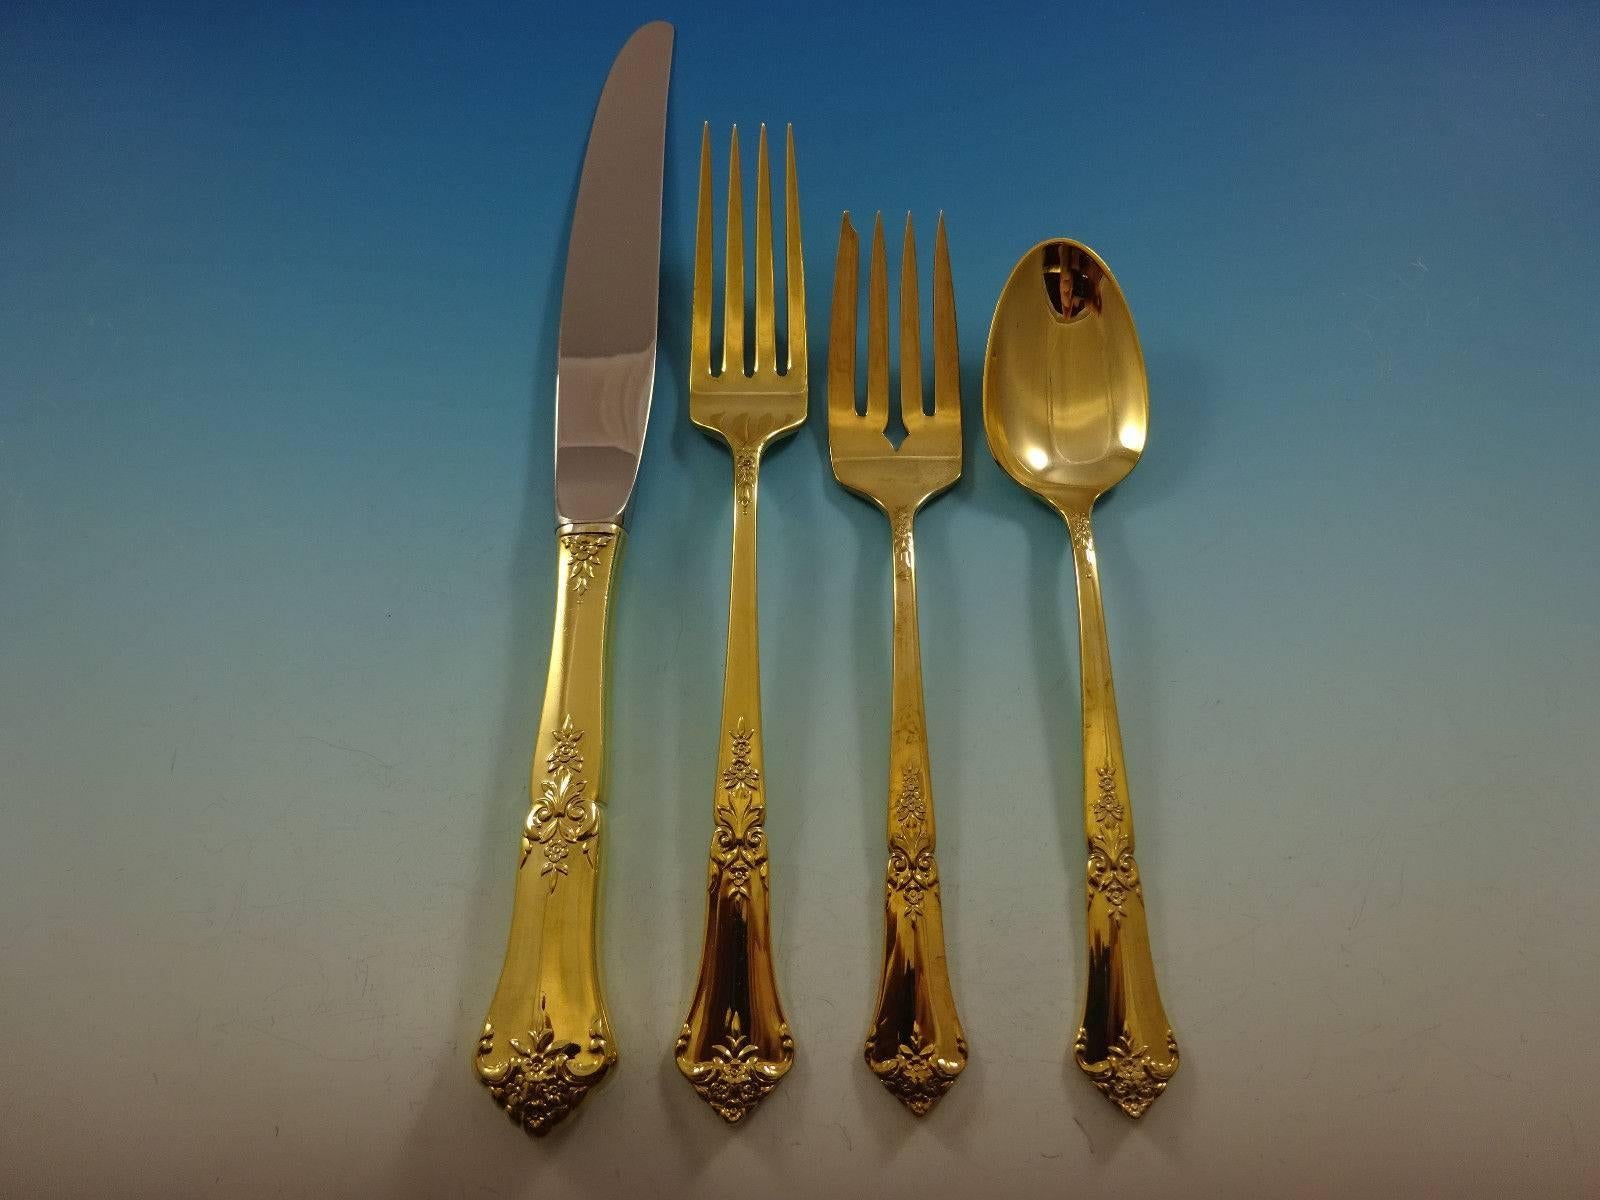 Gorgeous stately gold by State House sterling silver flatware set - 48 pieces. Gold flatware is on trend and makes a bold statement on your table. 

This set is vermeil (completely gold-washed) and includes:
 
12 Knives, 9 1/8